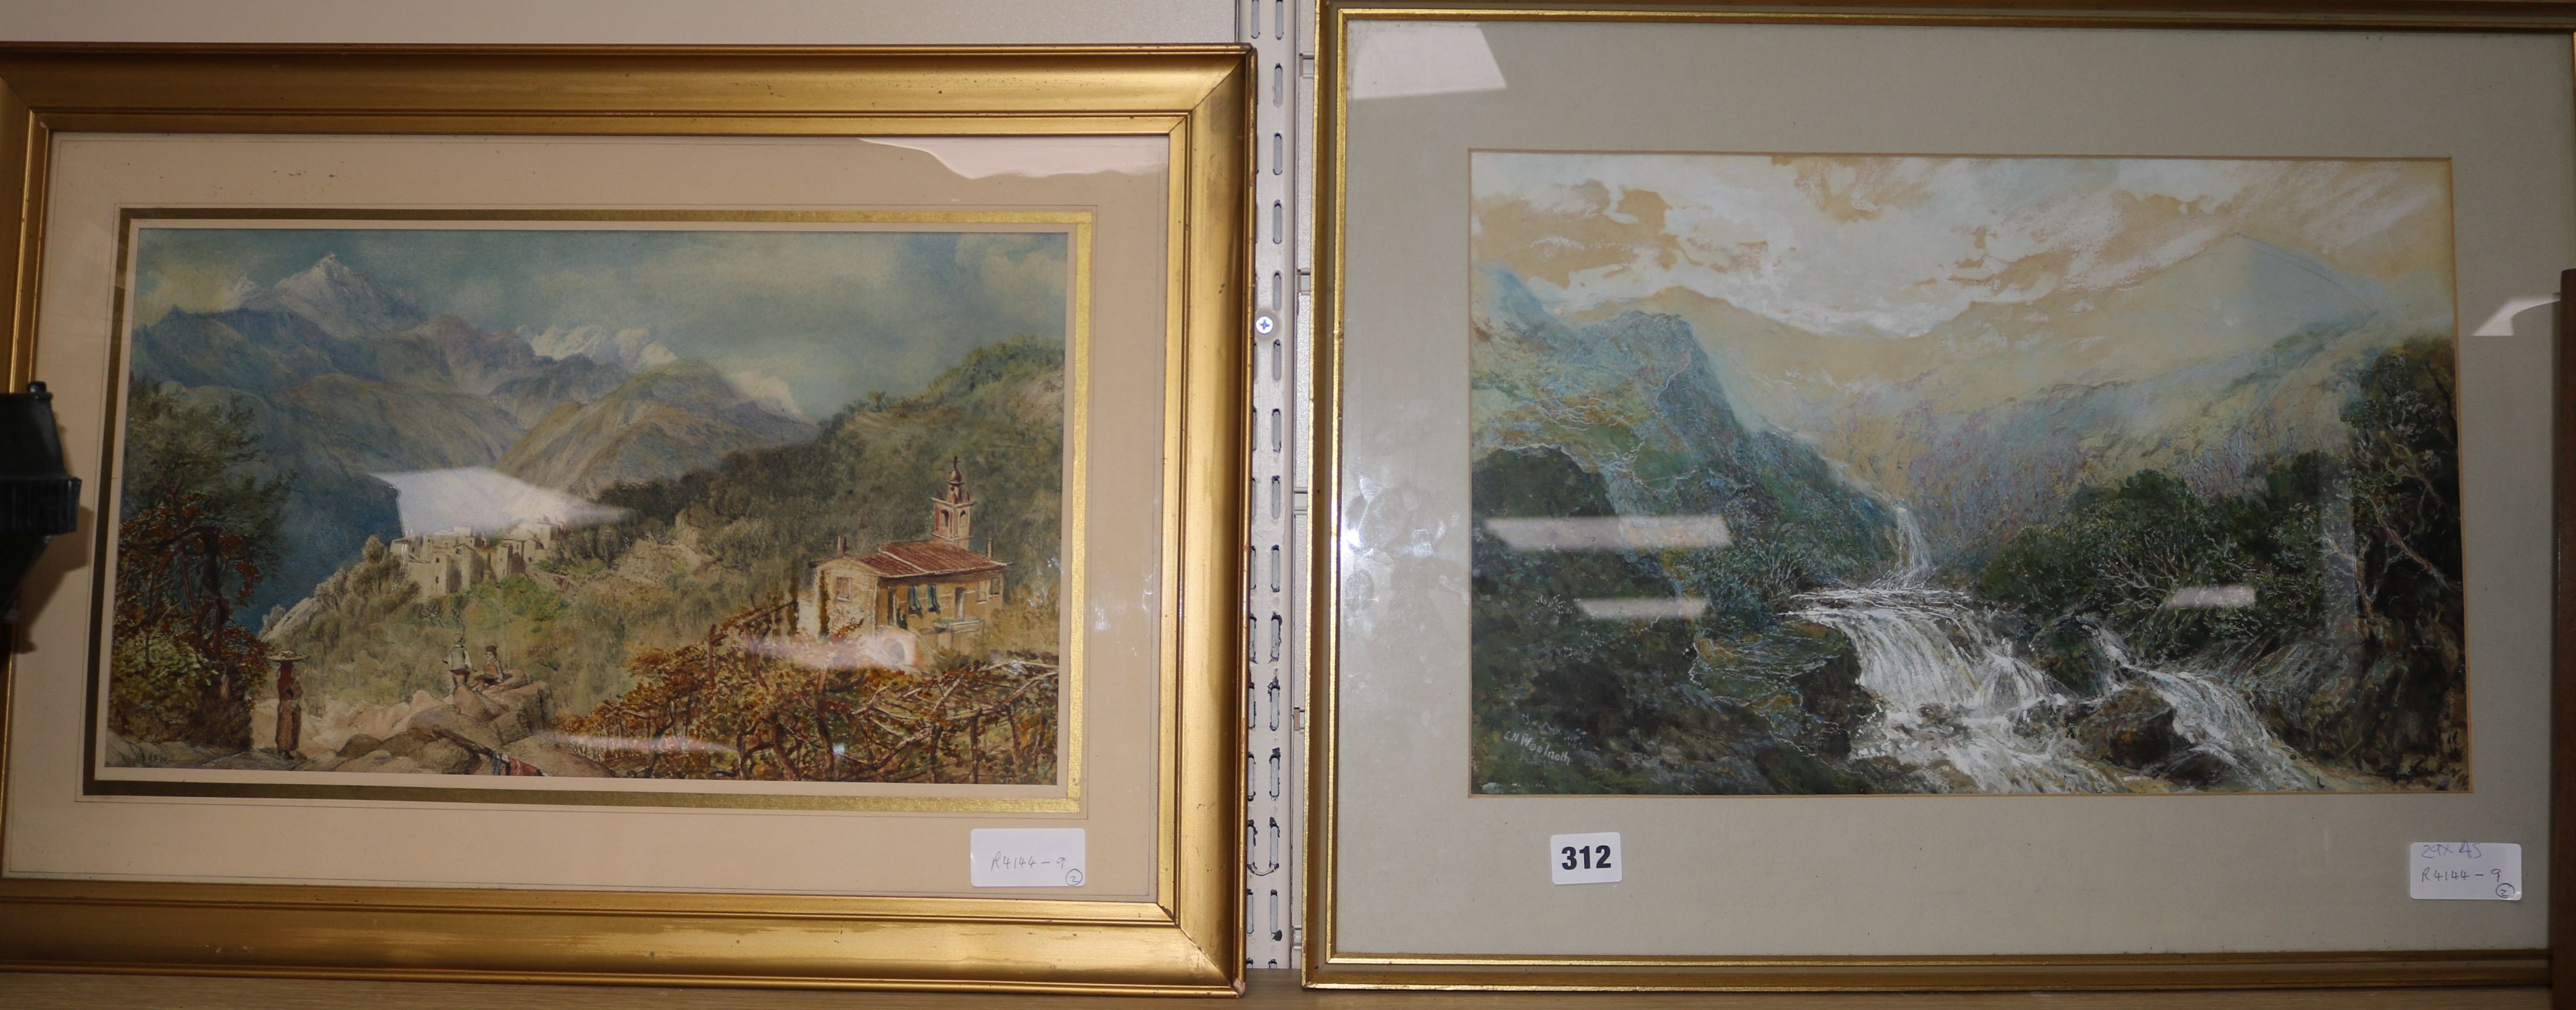 Late 19th centurywatercolourView of an Indian hill town, initialled HFW, and a watercolour of a